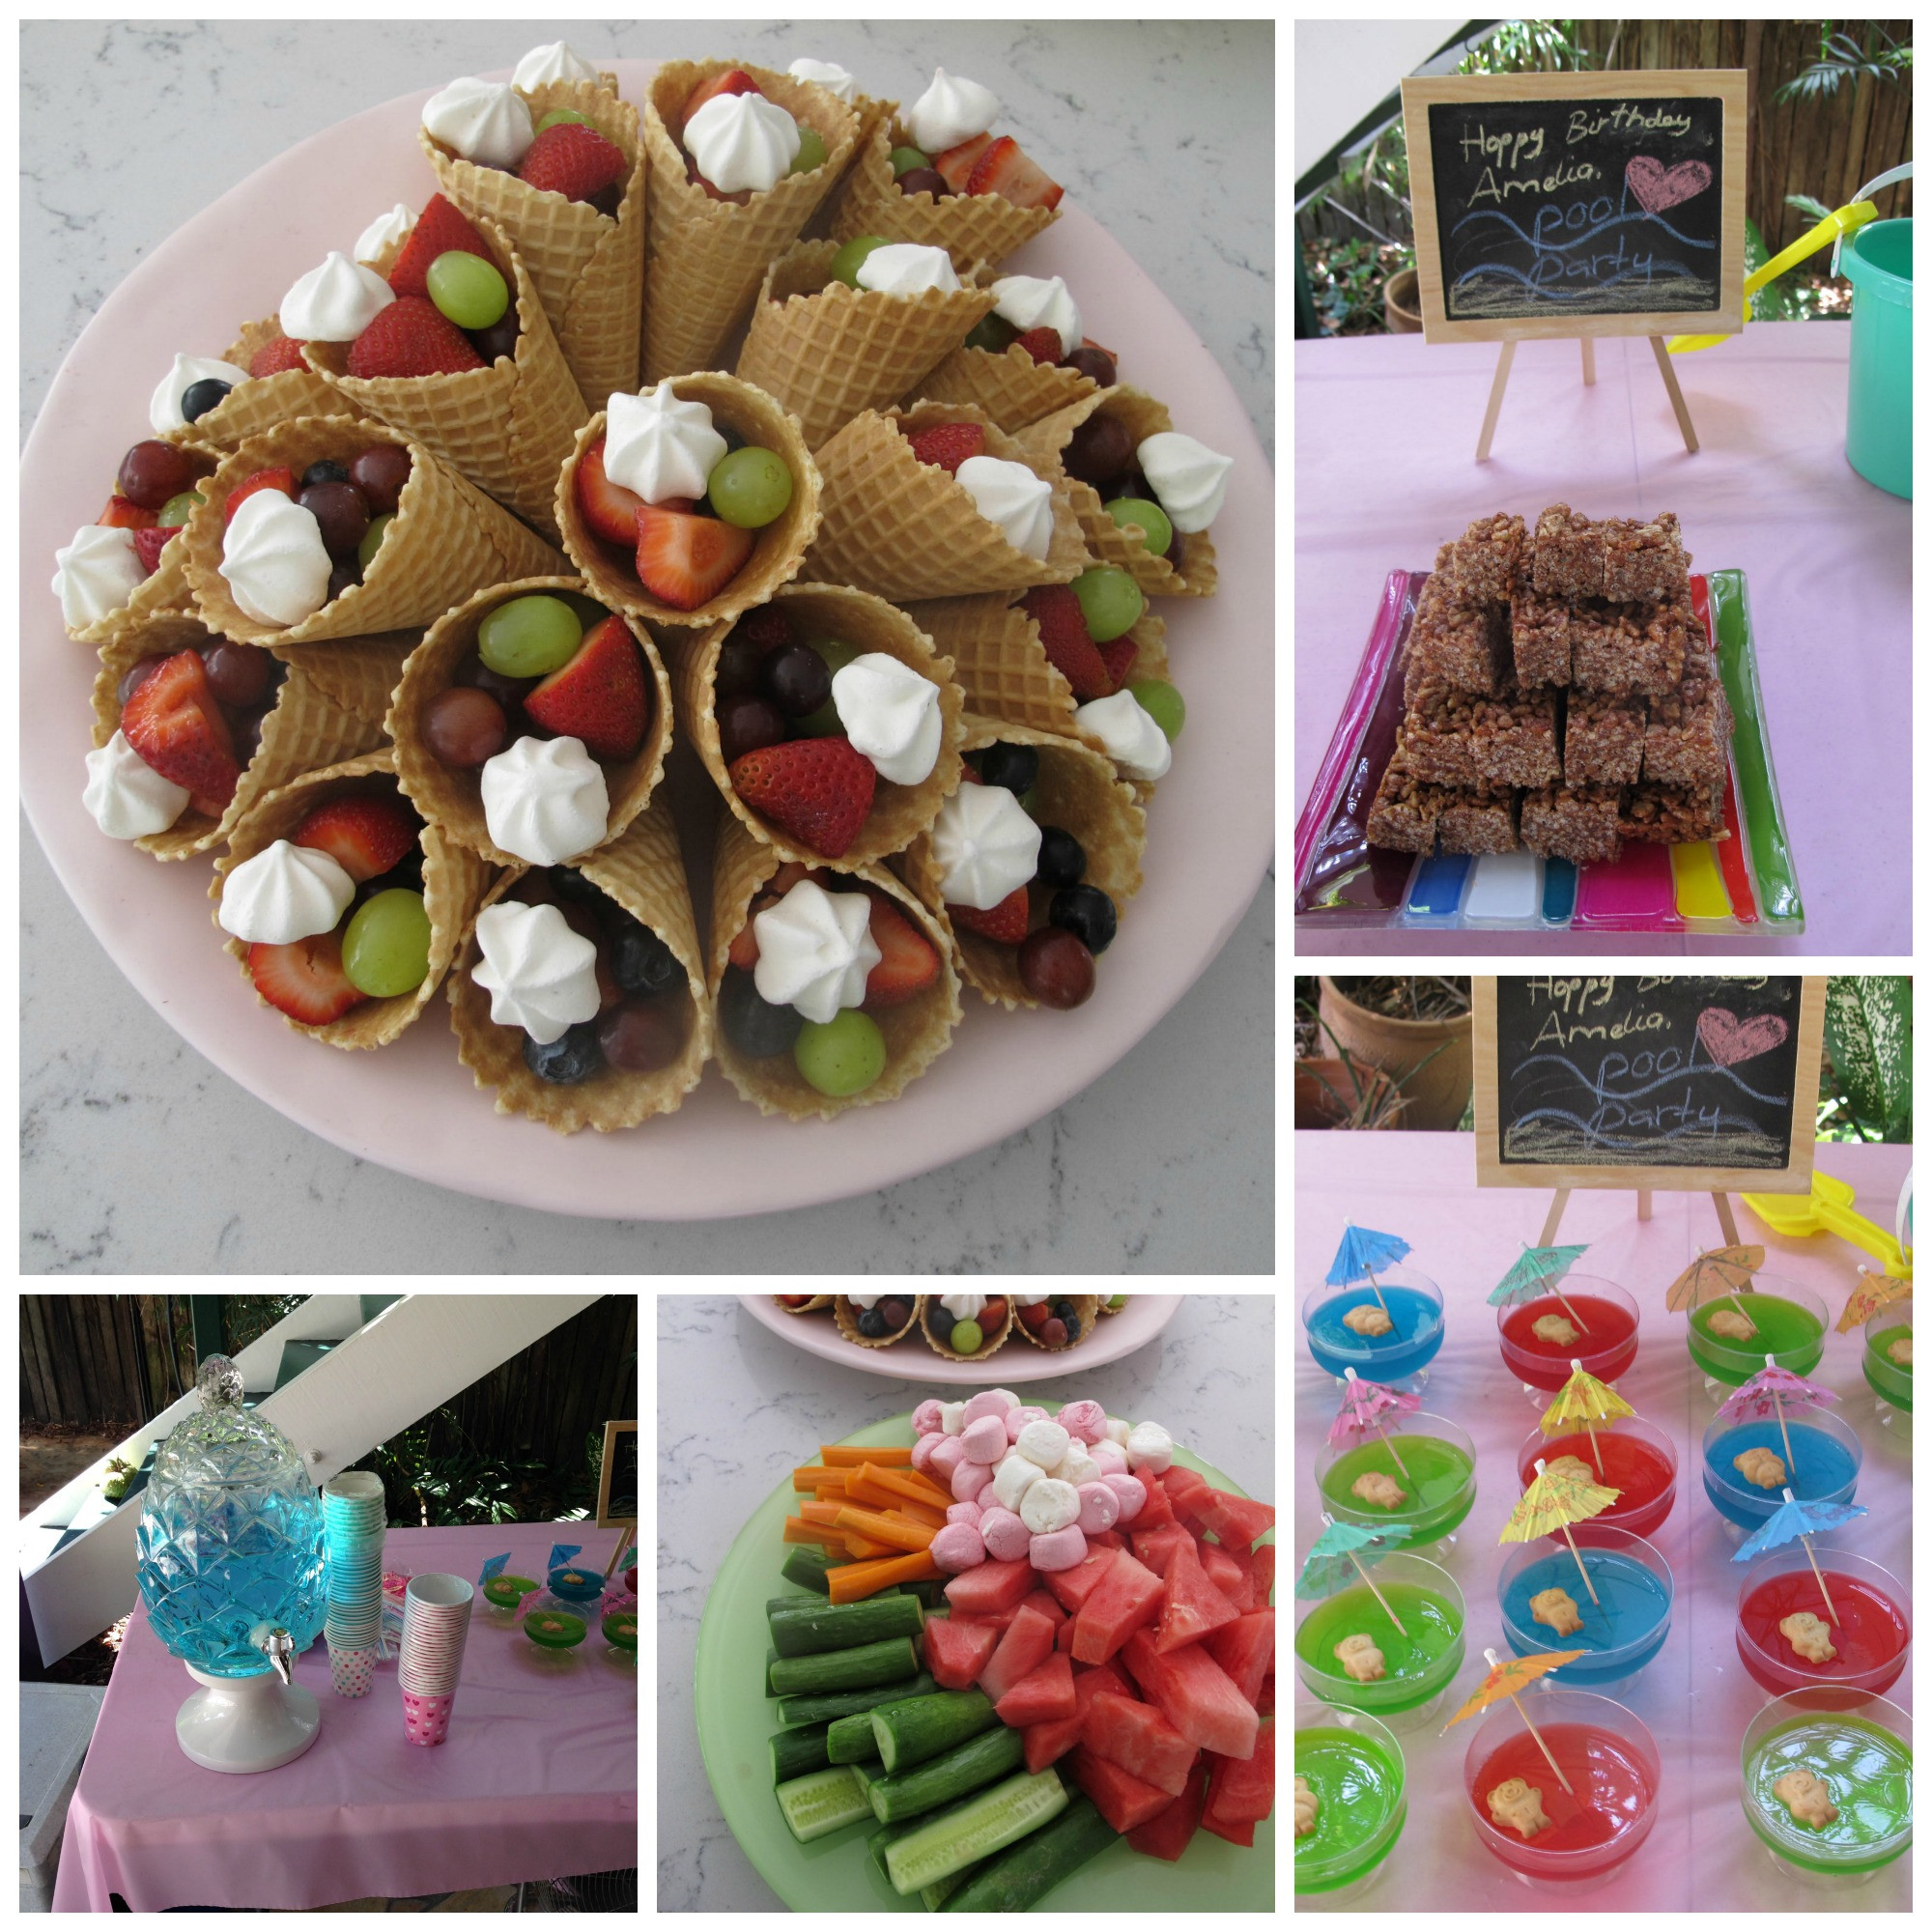 Pool Party Food Ideas For Teenagers
 Birthday Pool Party Tips Tricks and Cake hint have